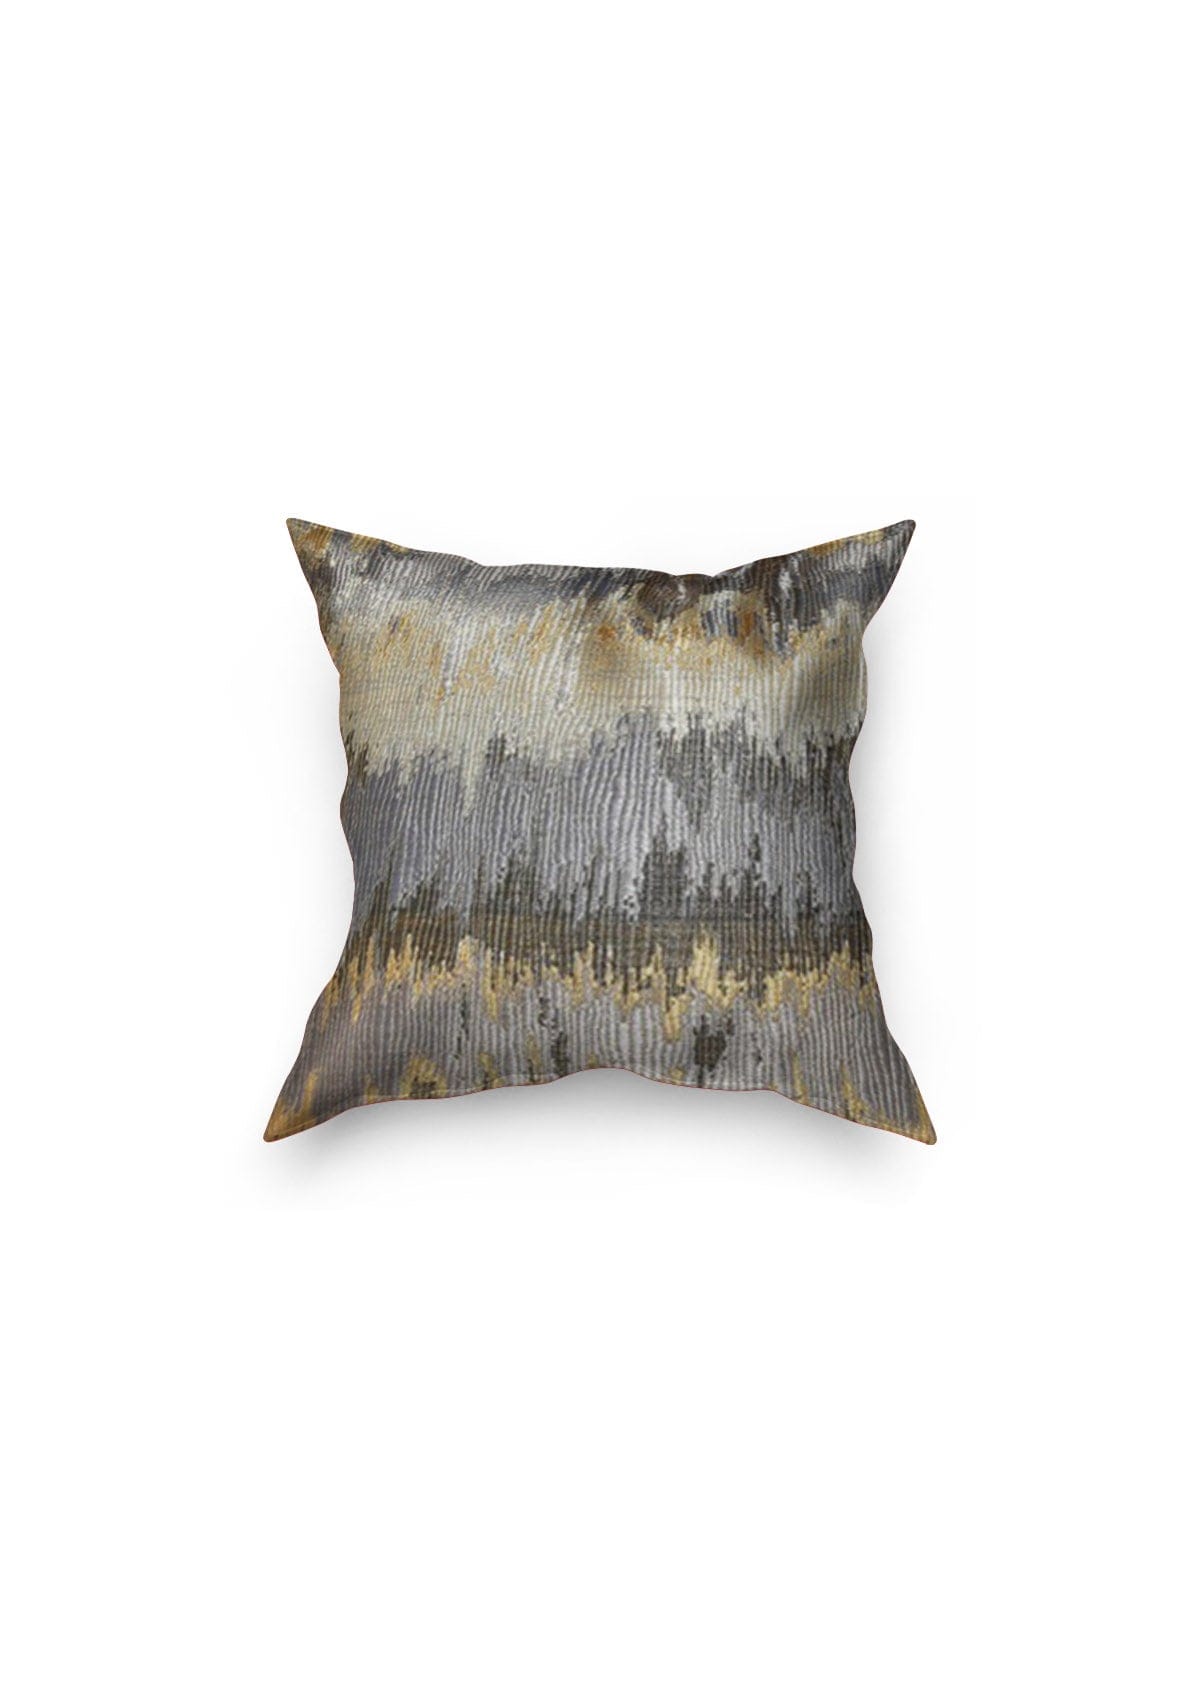 Grey and Gold Cushion Covers | CovermyCushion